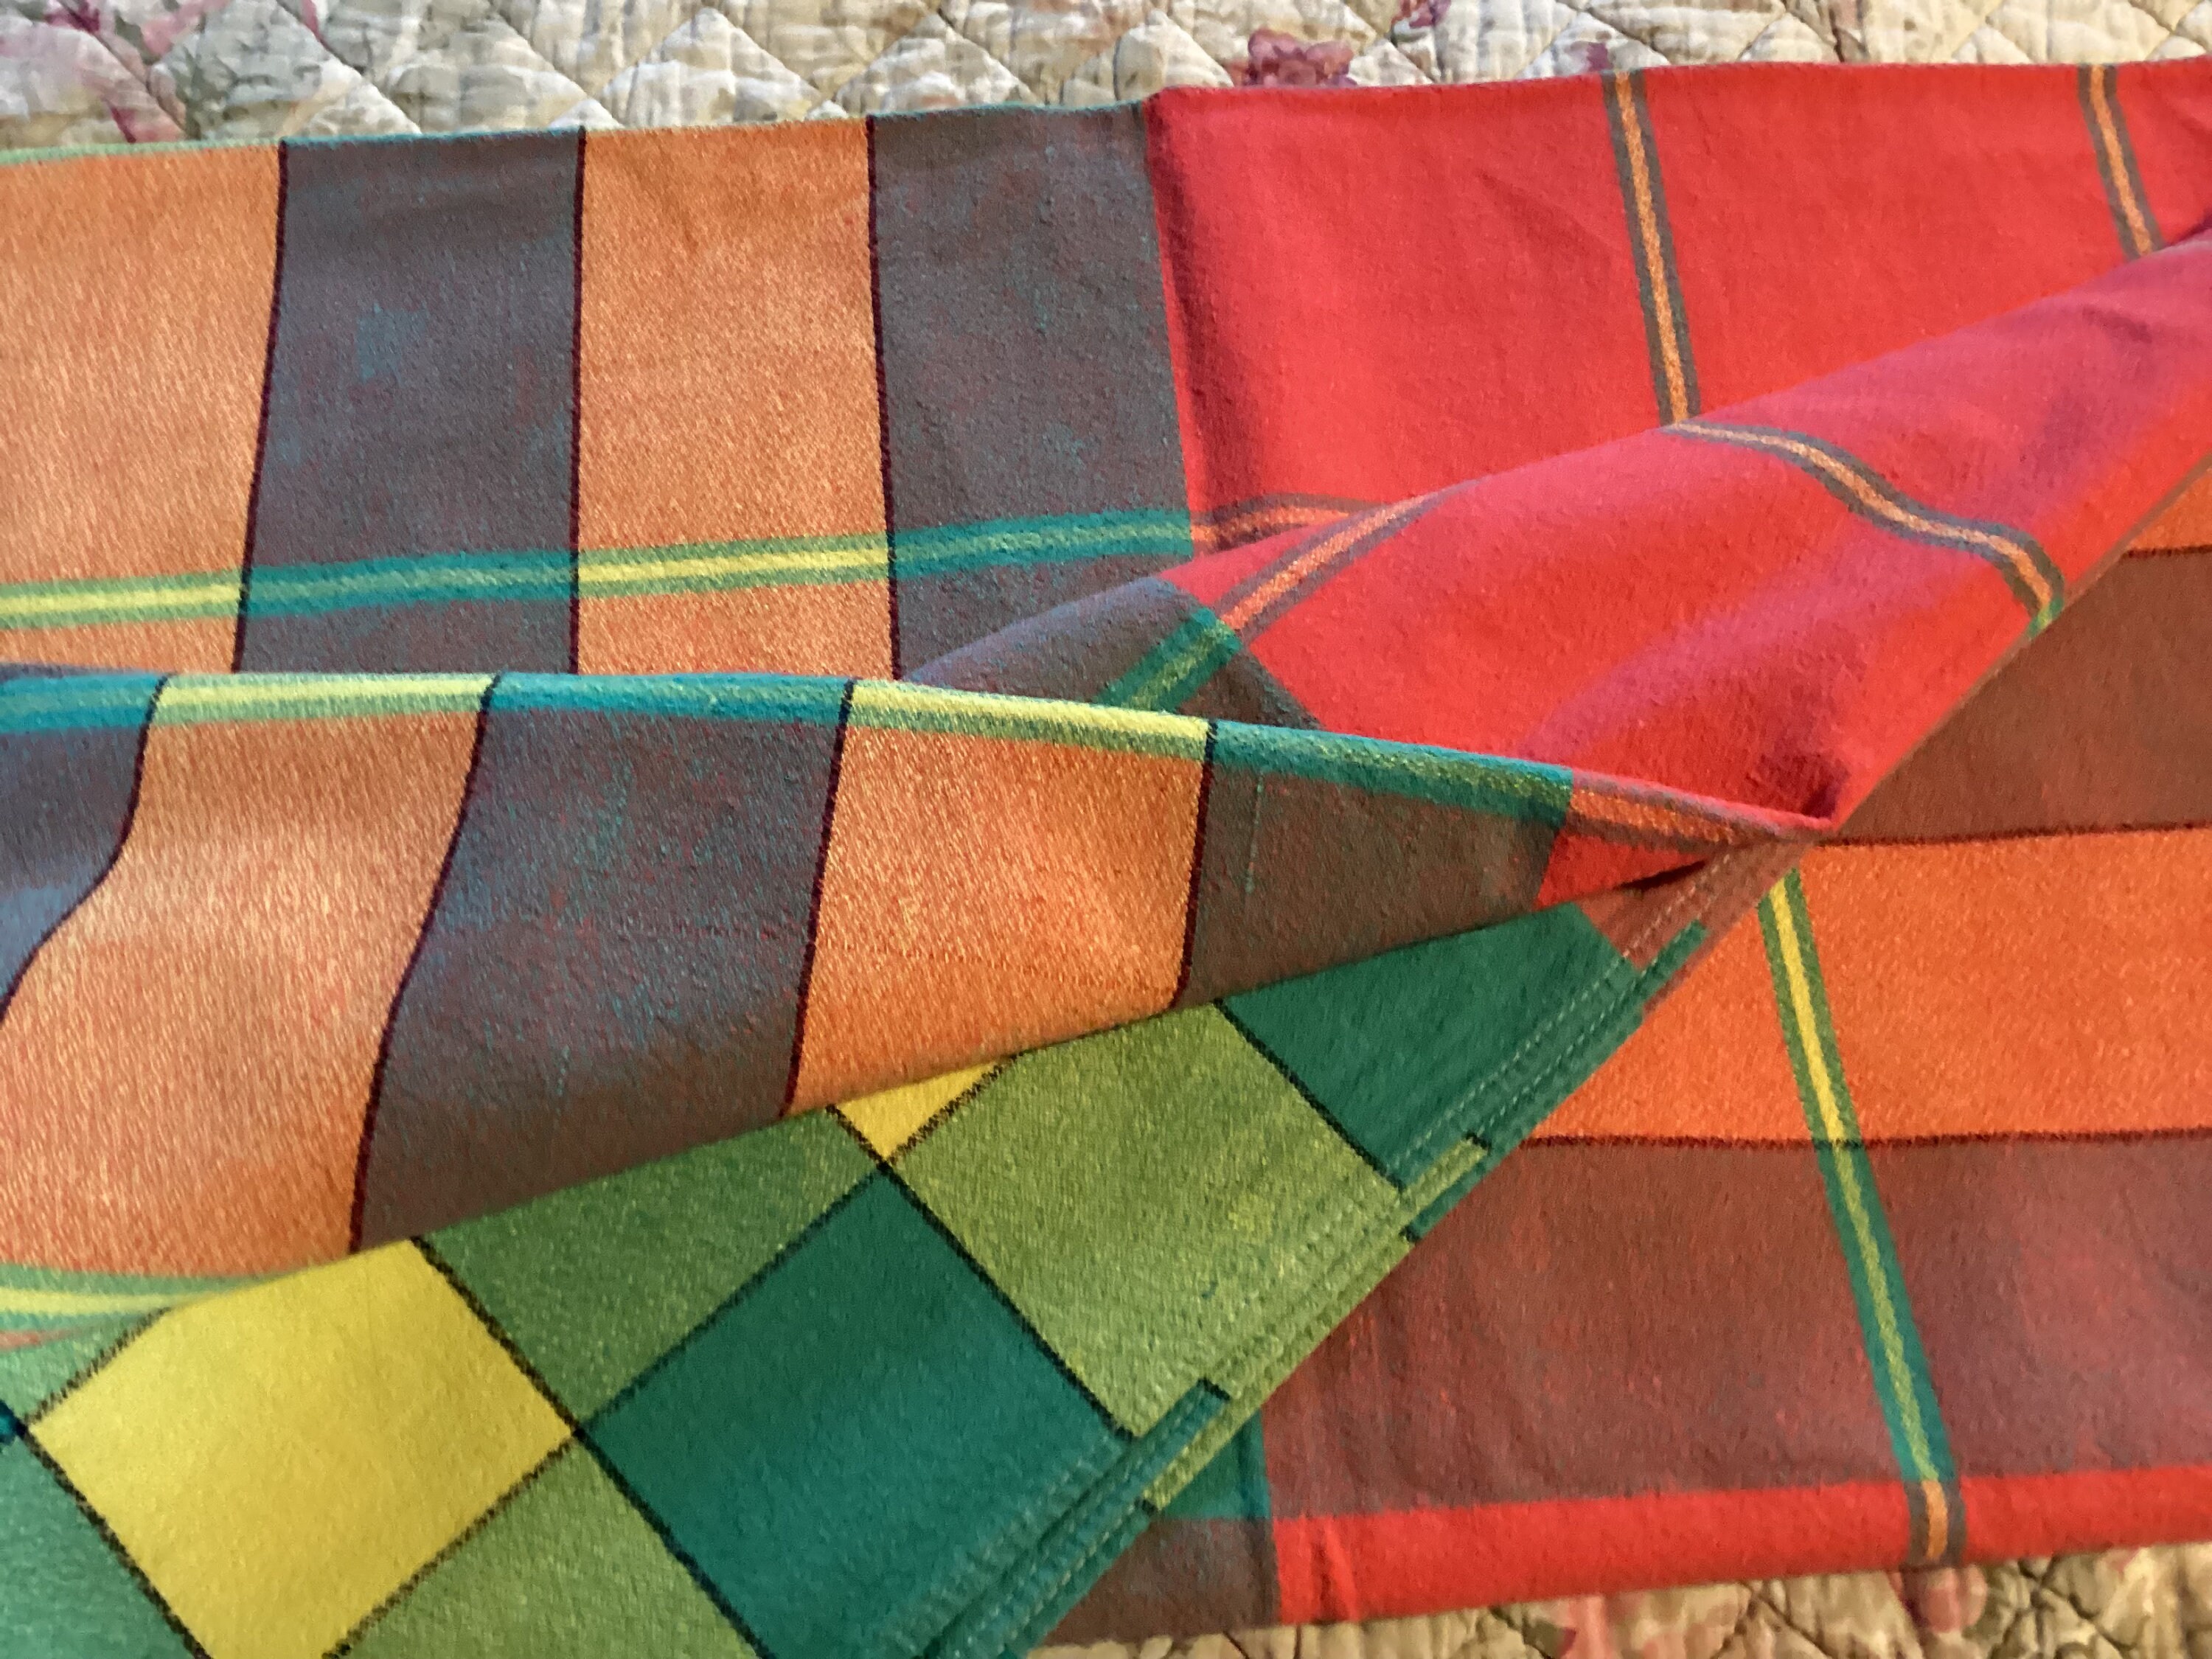 Braumhaus Cotton Tablecloth, Madras Check Plaid Tartan, Colourful Rainbow,  Housewarming Gift, Mothers Day Gift 